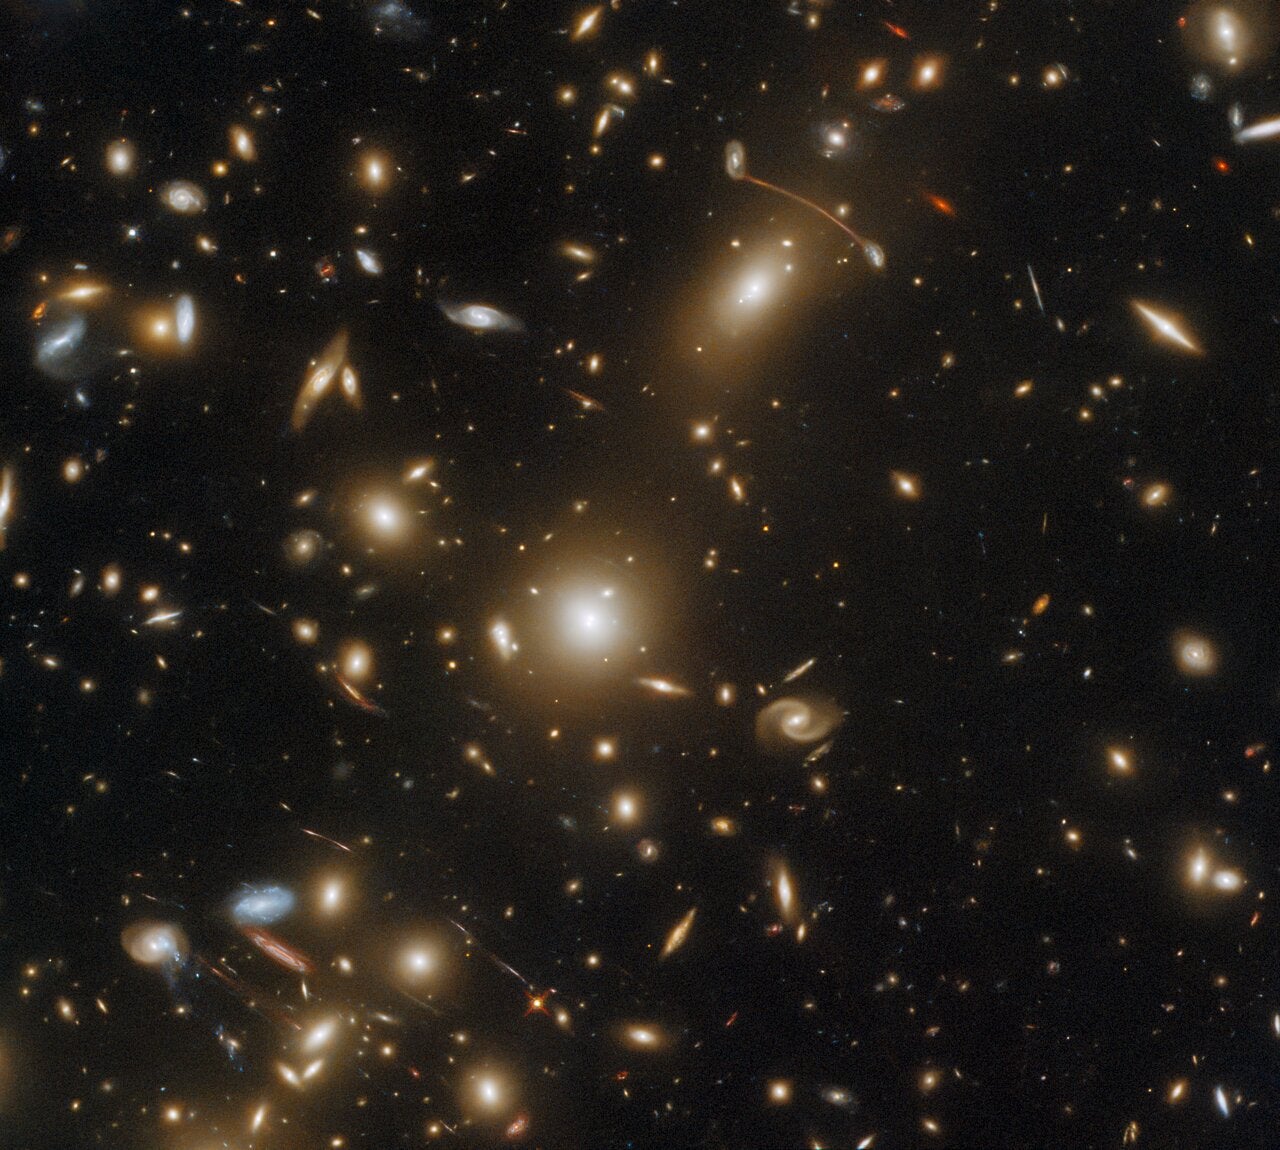 An image of the distant galaxy cluster Abell 1351 taken by the Hubble Space Telescope